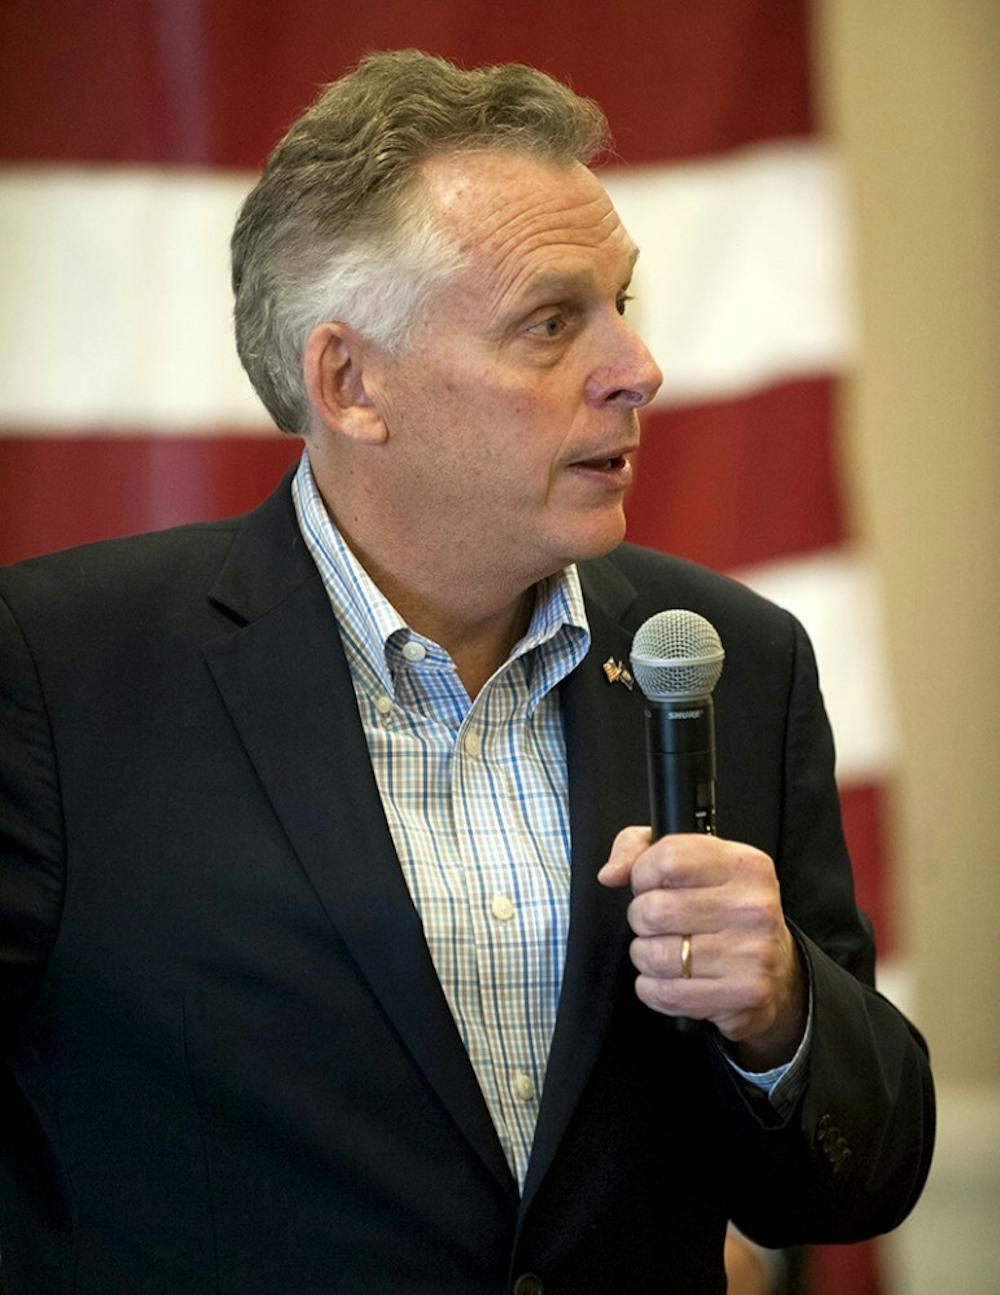 <p>After the Virginia Supreme Court decision, McAuliffe pledged to begin restoring voting rights to felons on an individual basis.&nbsp;</p>